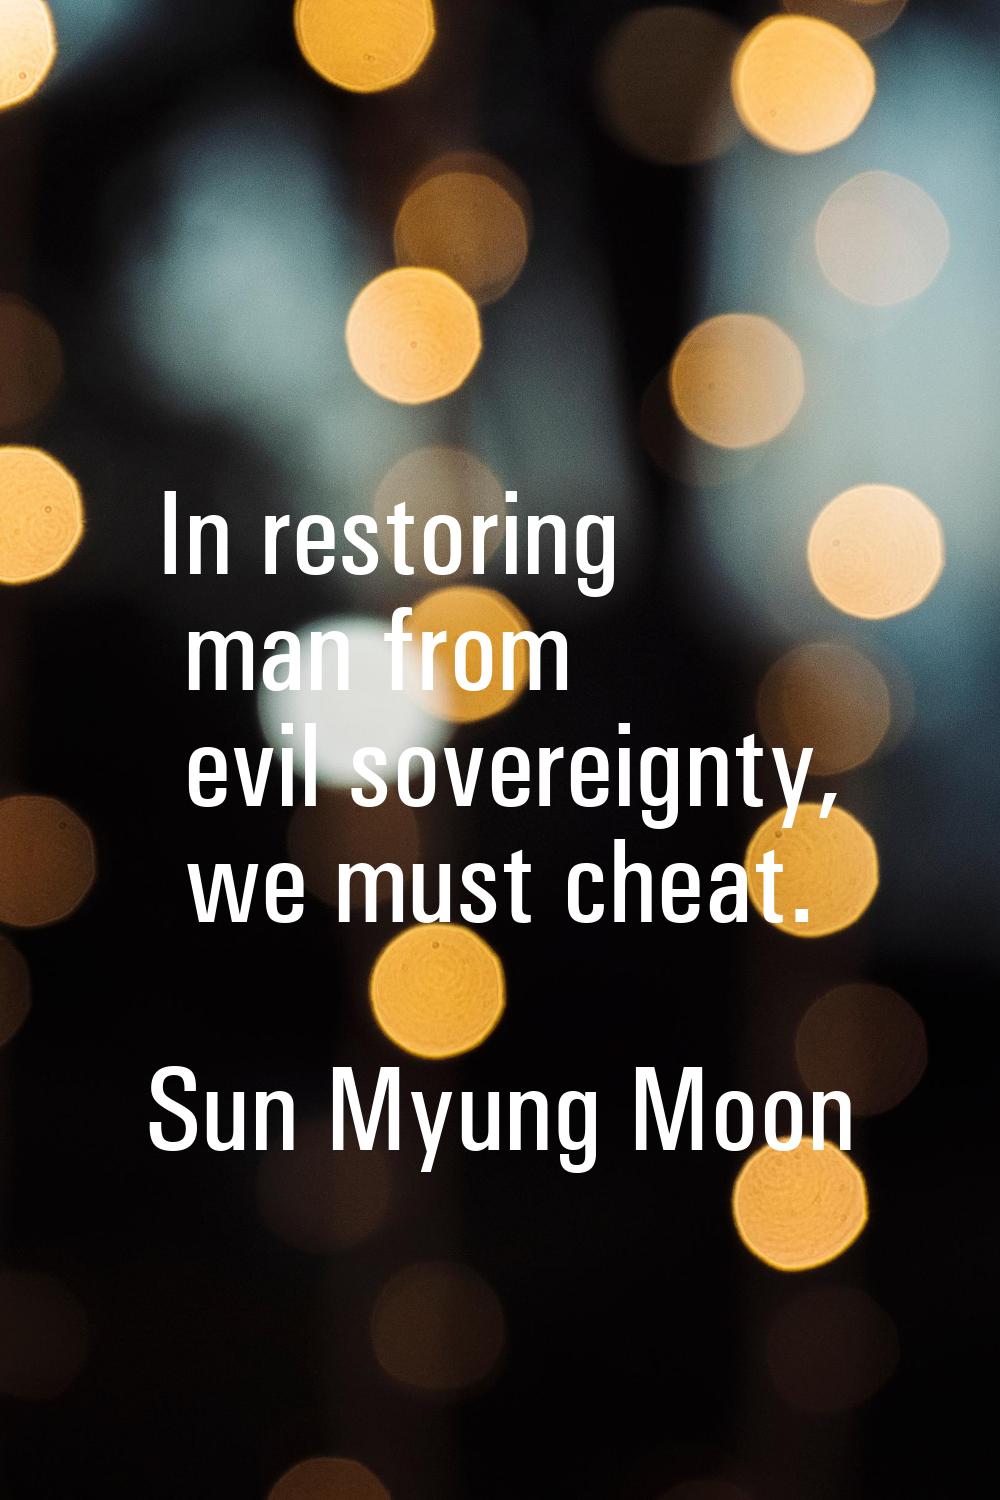 In restoring man from evil sovereignty, we must cheat.